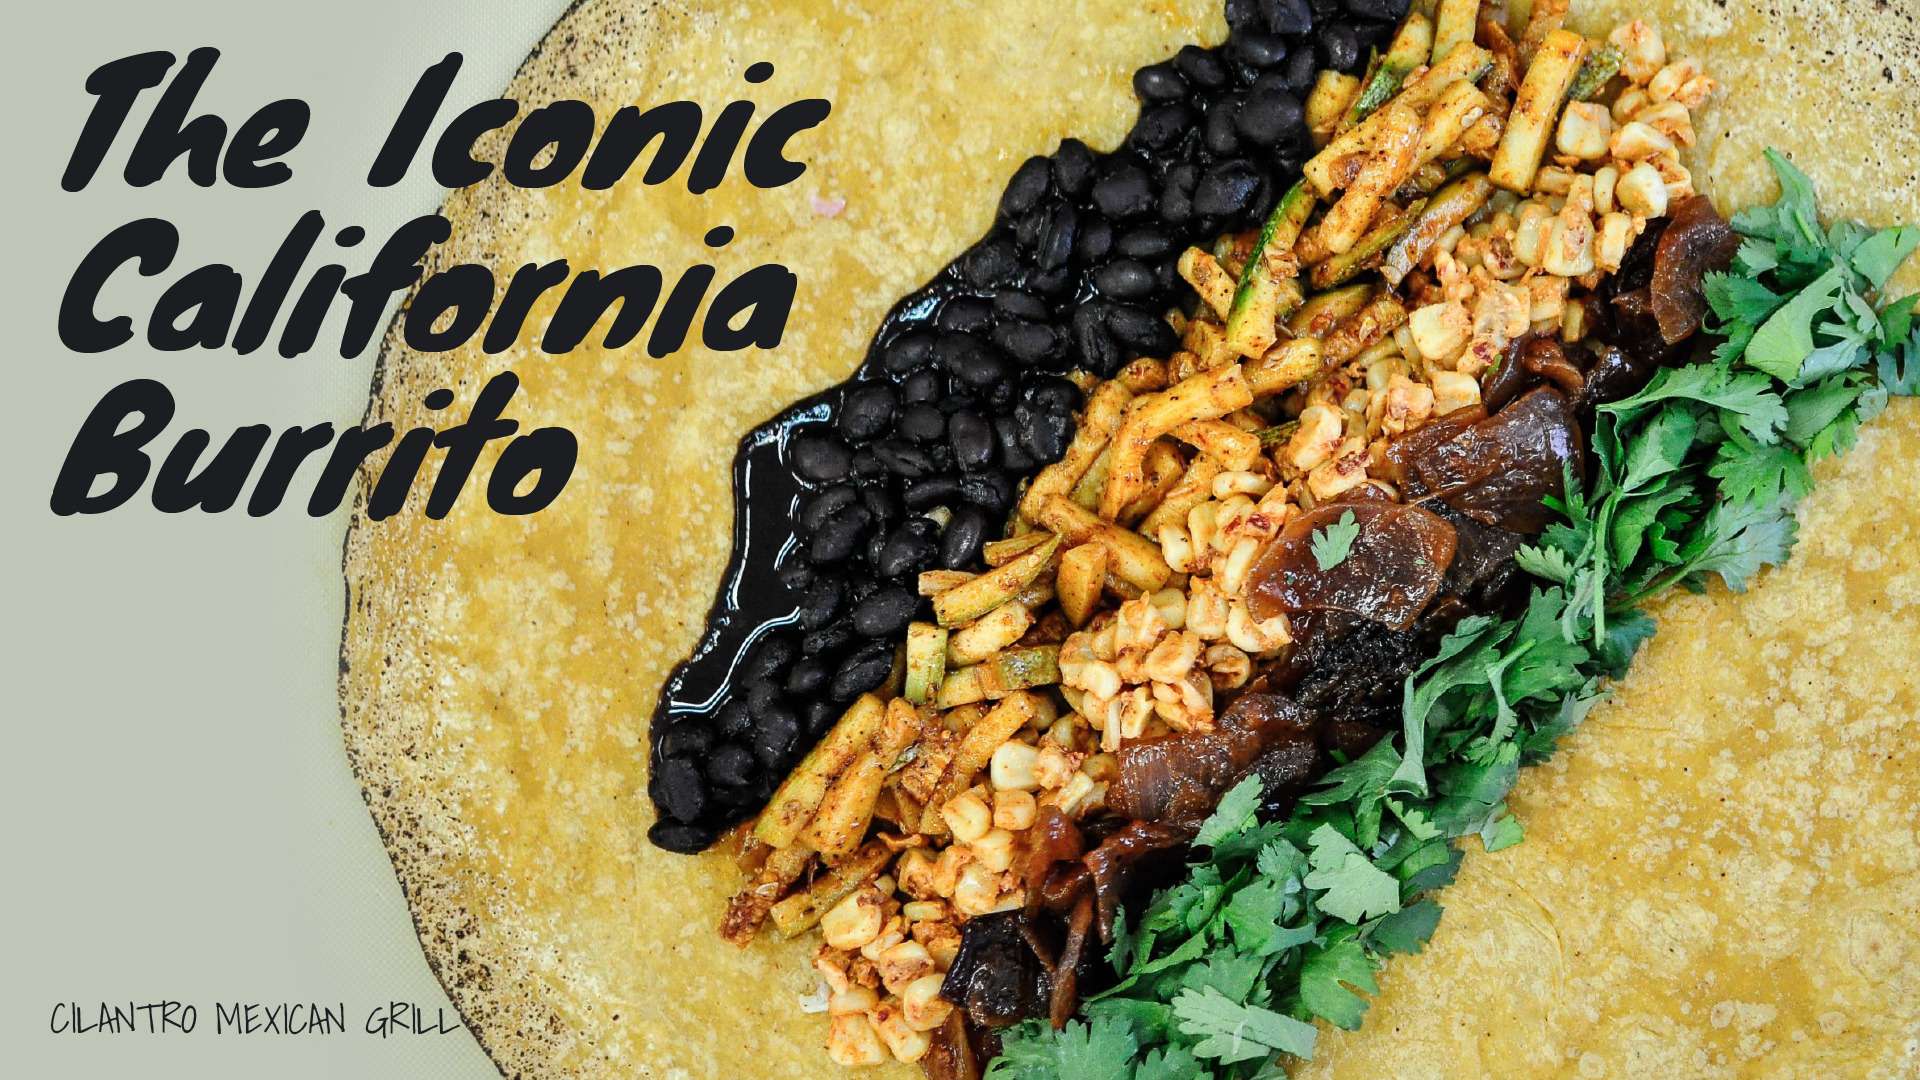 Cilantro Mexican Grill: Satisfy Your Cravings with the Iconic California Burrito